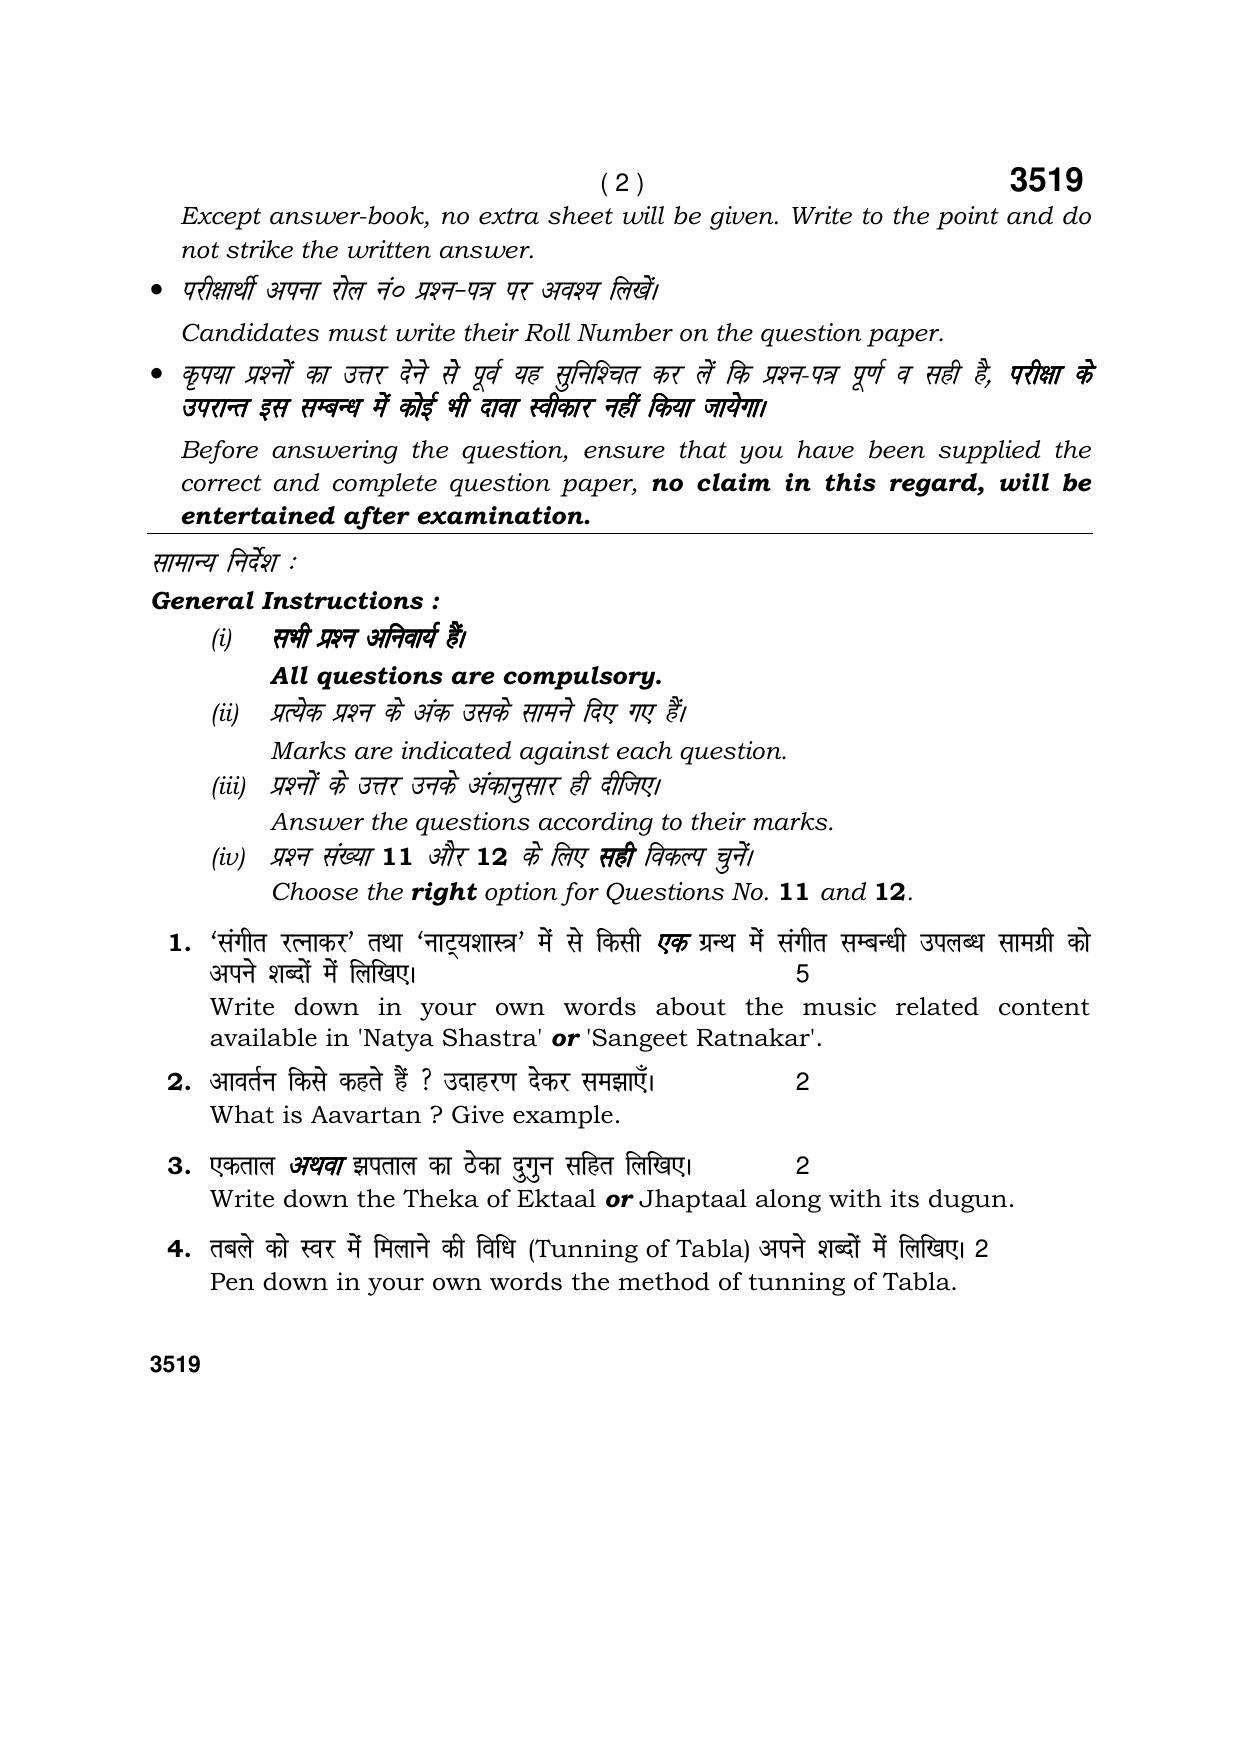 Haryana Board HBSE Class 10 Music Hindustani (Percussion) 2018 Question Paper - Page 2